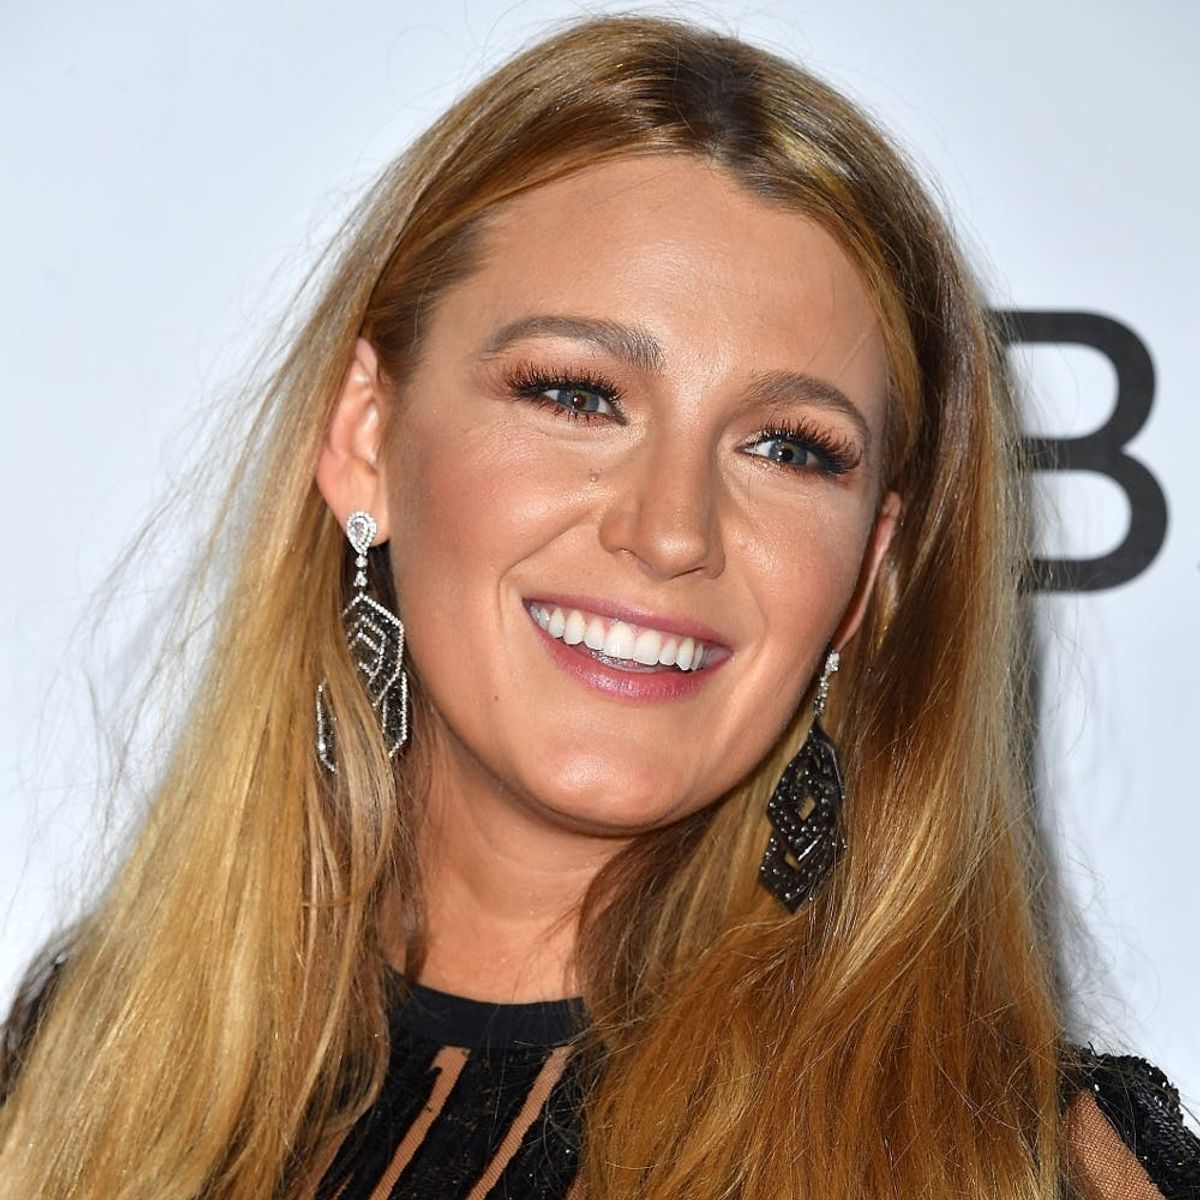 Blake Lively’s Joke About Her Baby Girls Is SO Adorable